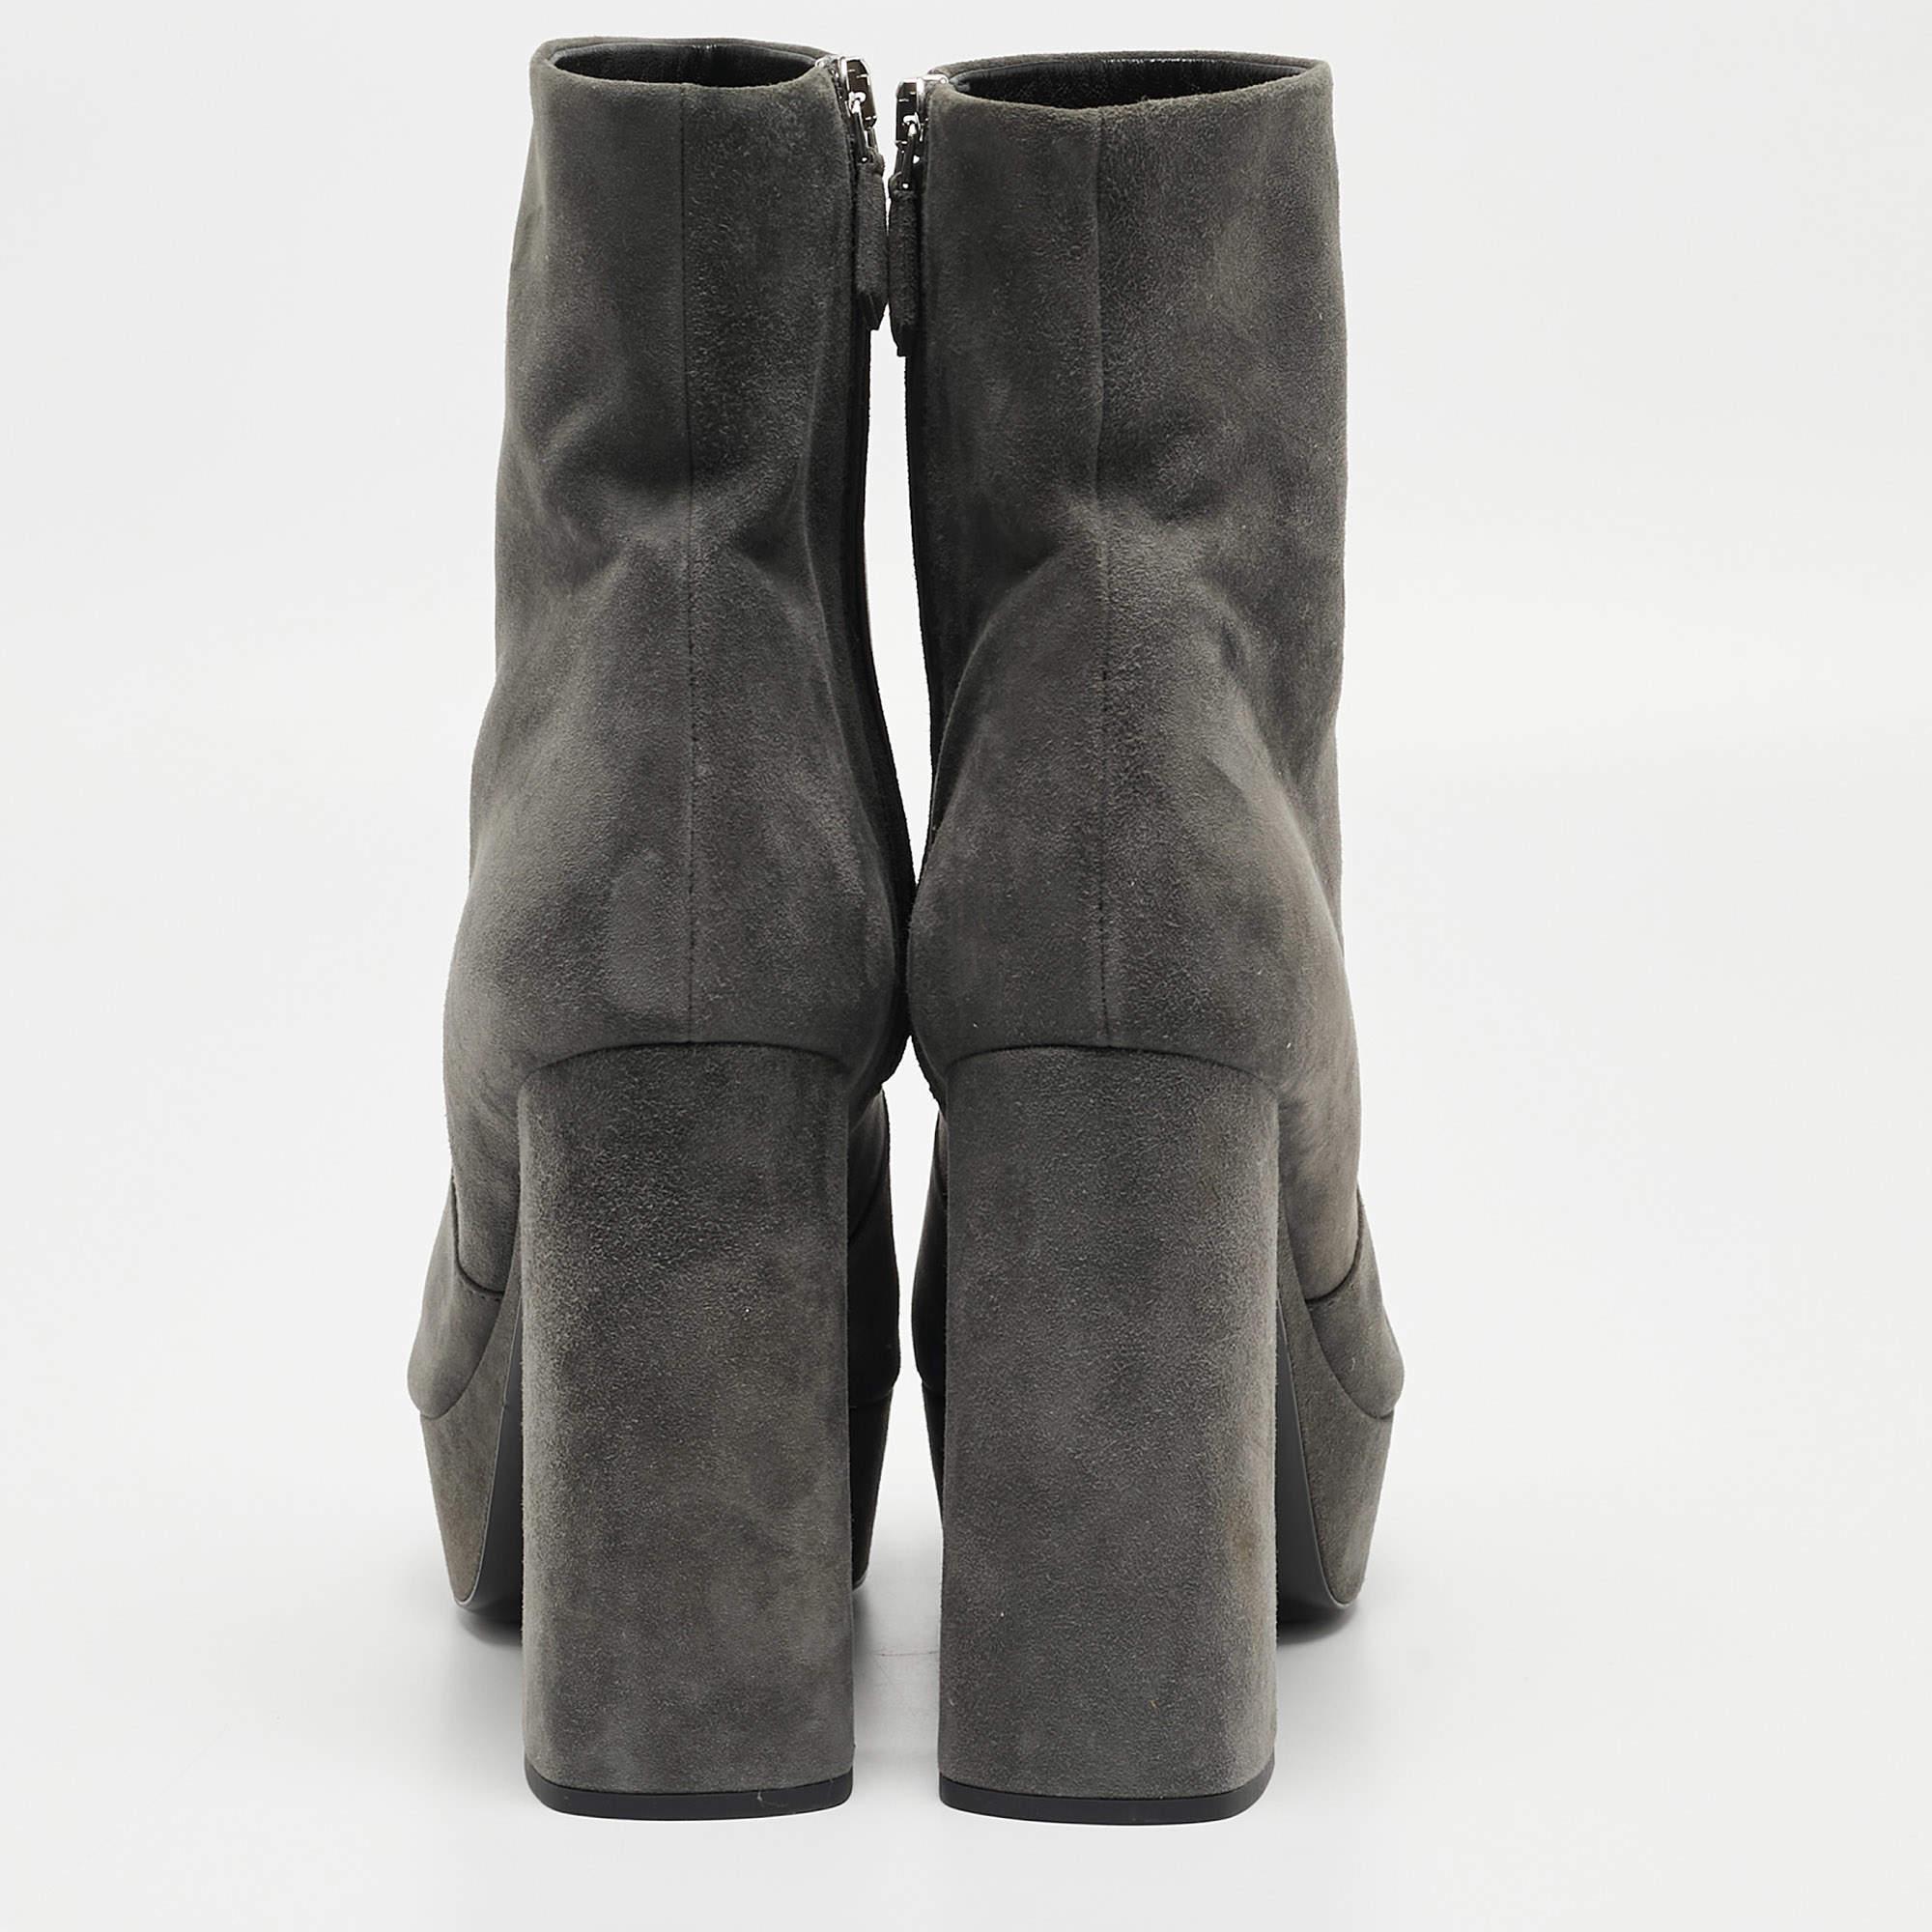 Prada Grey Suede Ankle Boots Size 39.5 For Sale 4